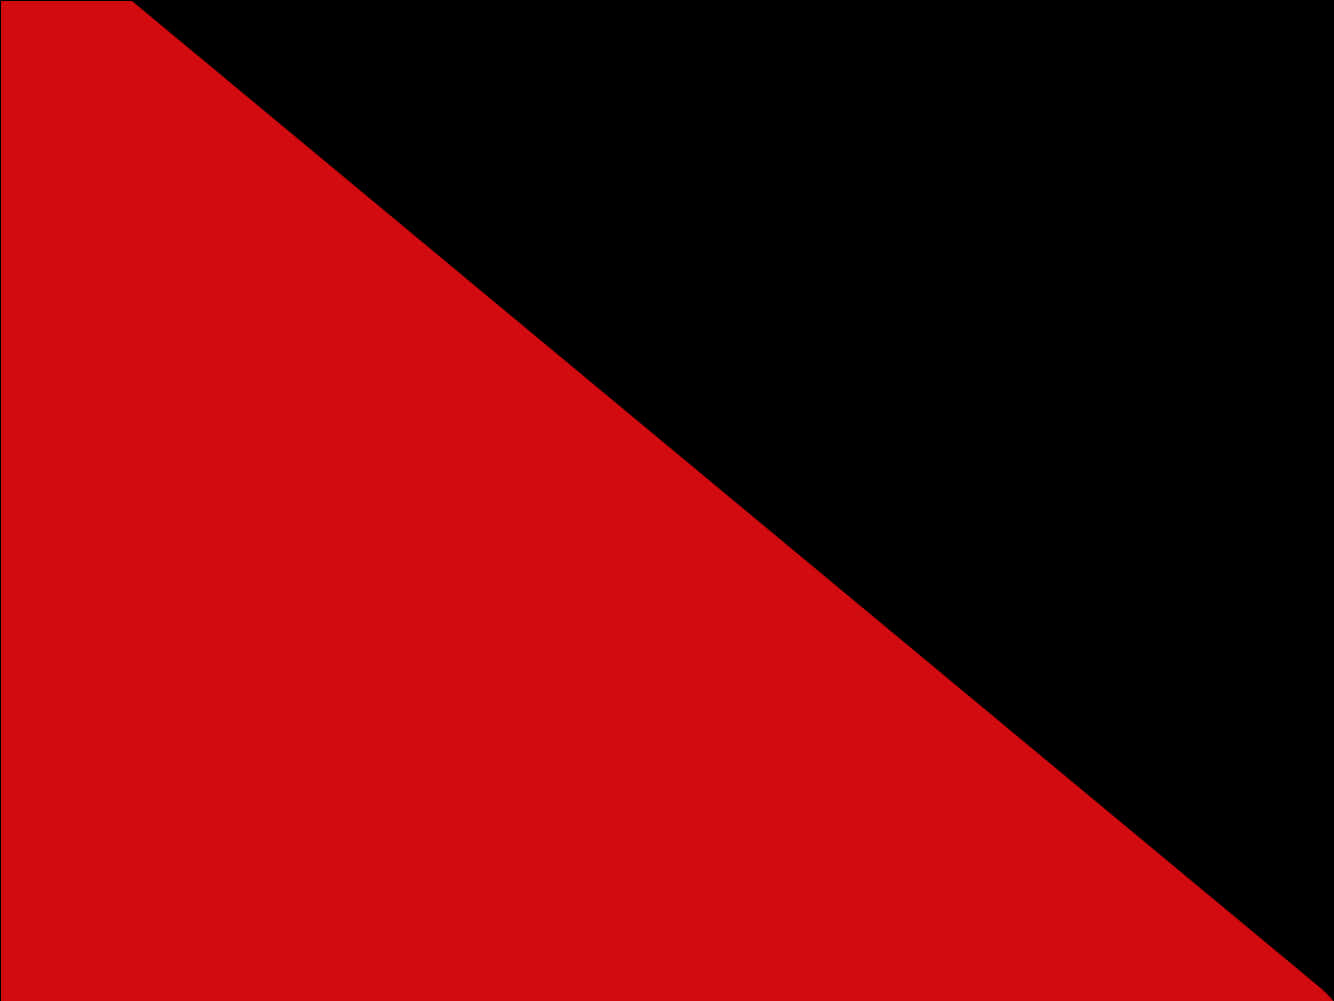 Red Banner Png